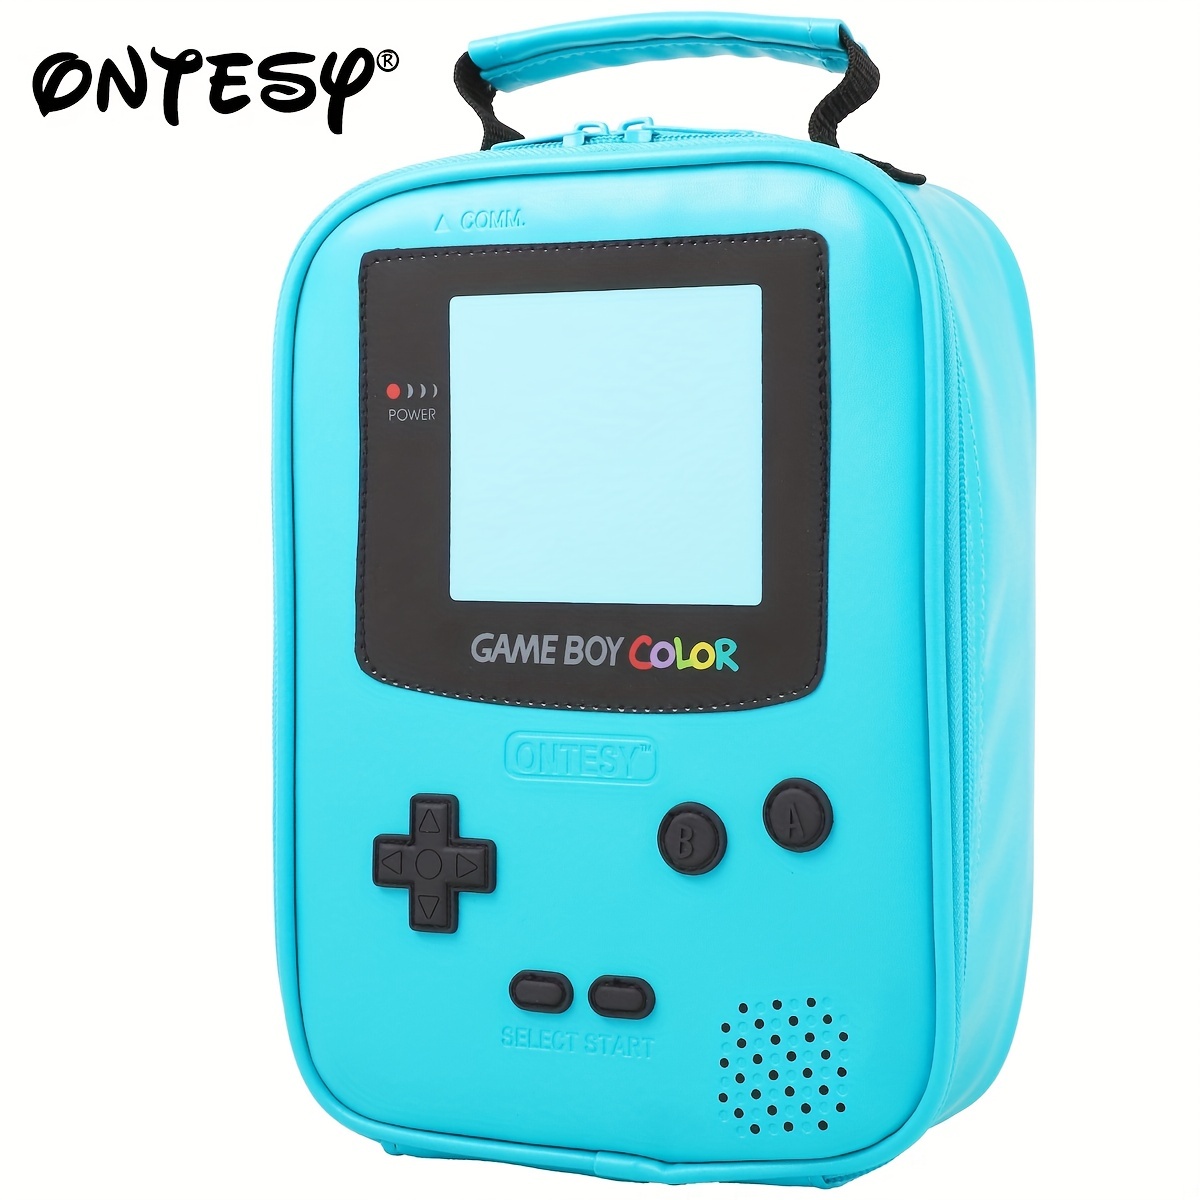 

Boys Lunch Bag Gameboy Leather Lunch Box Reusable Waterproof Thermal Insulated Cooler Bag For Kids Boys Girls Toddlers Teens Men Women